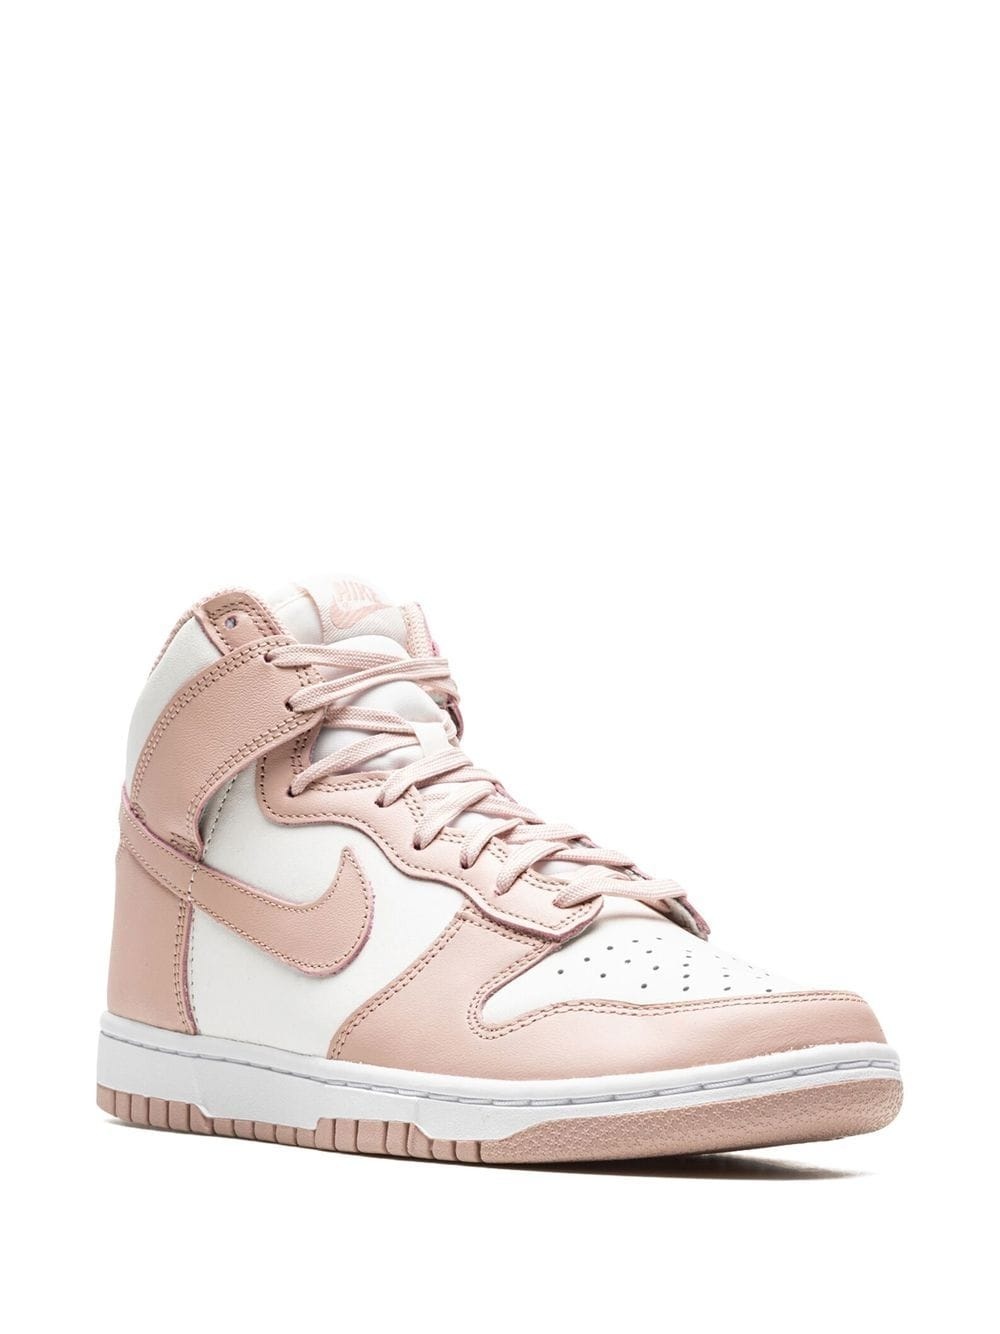 Dunk High “Pink Oxford” sneakers - 2